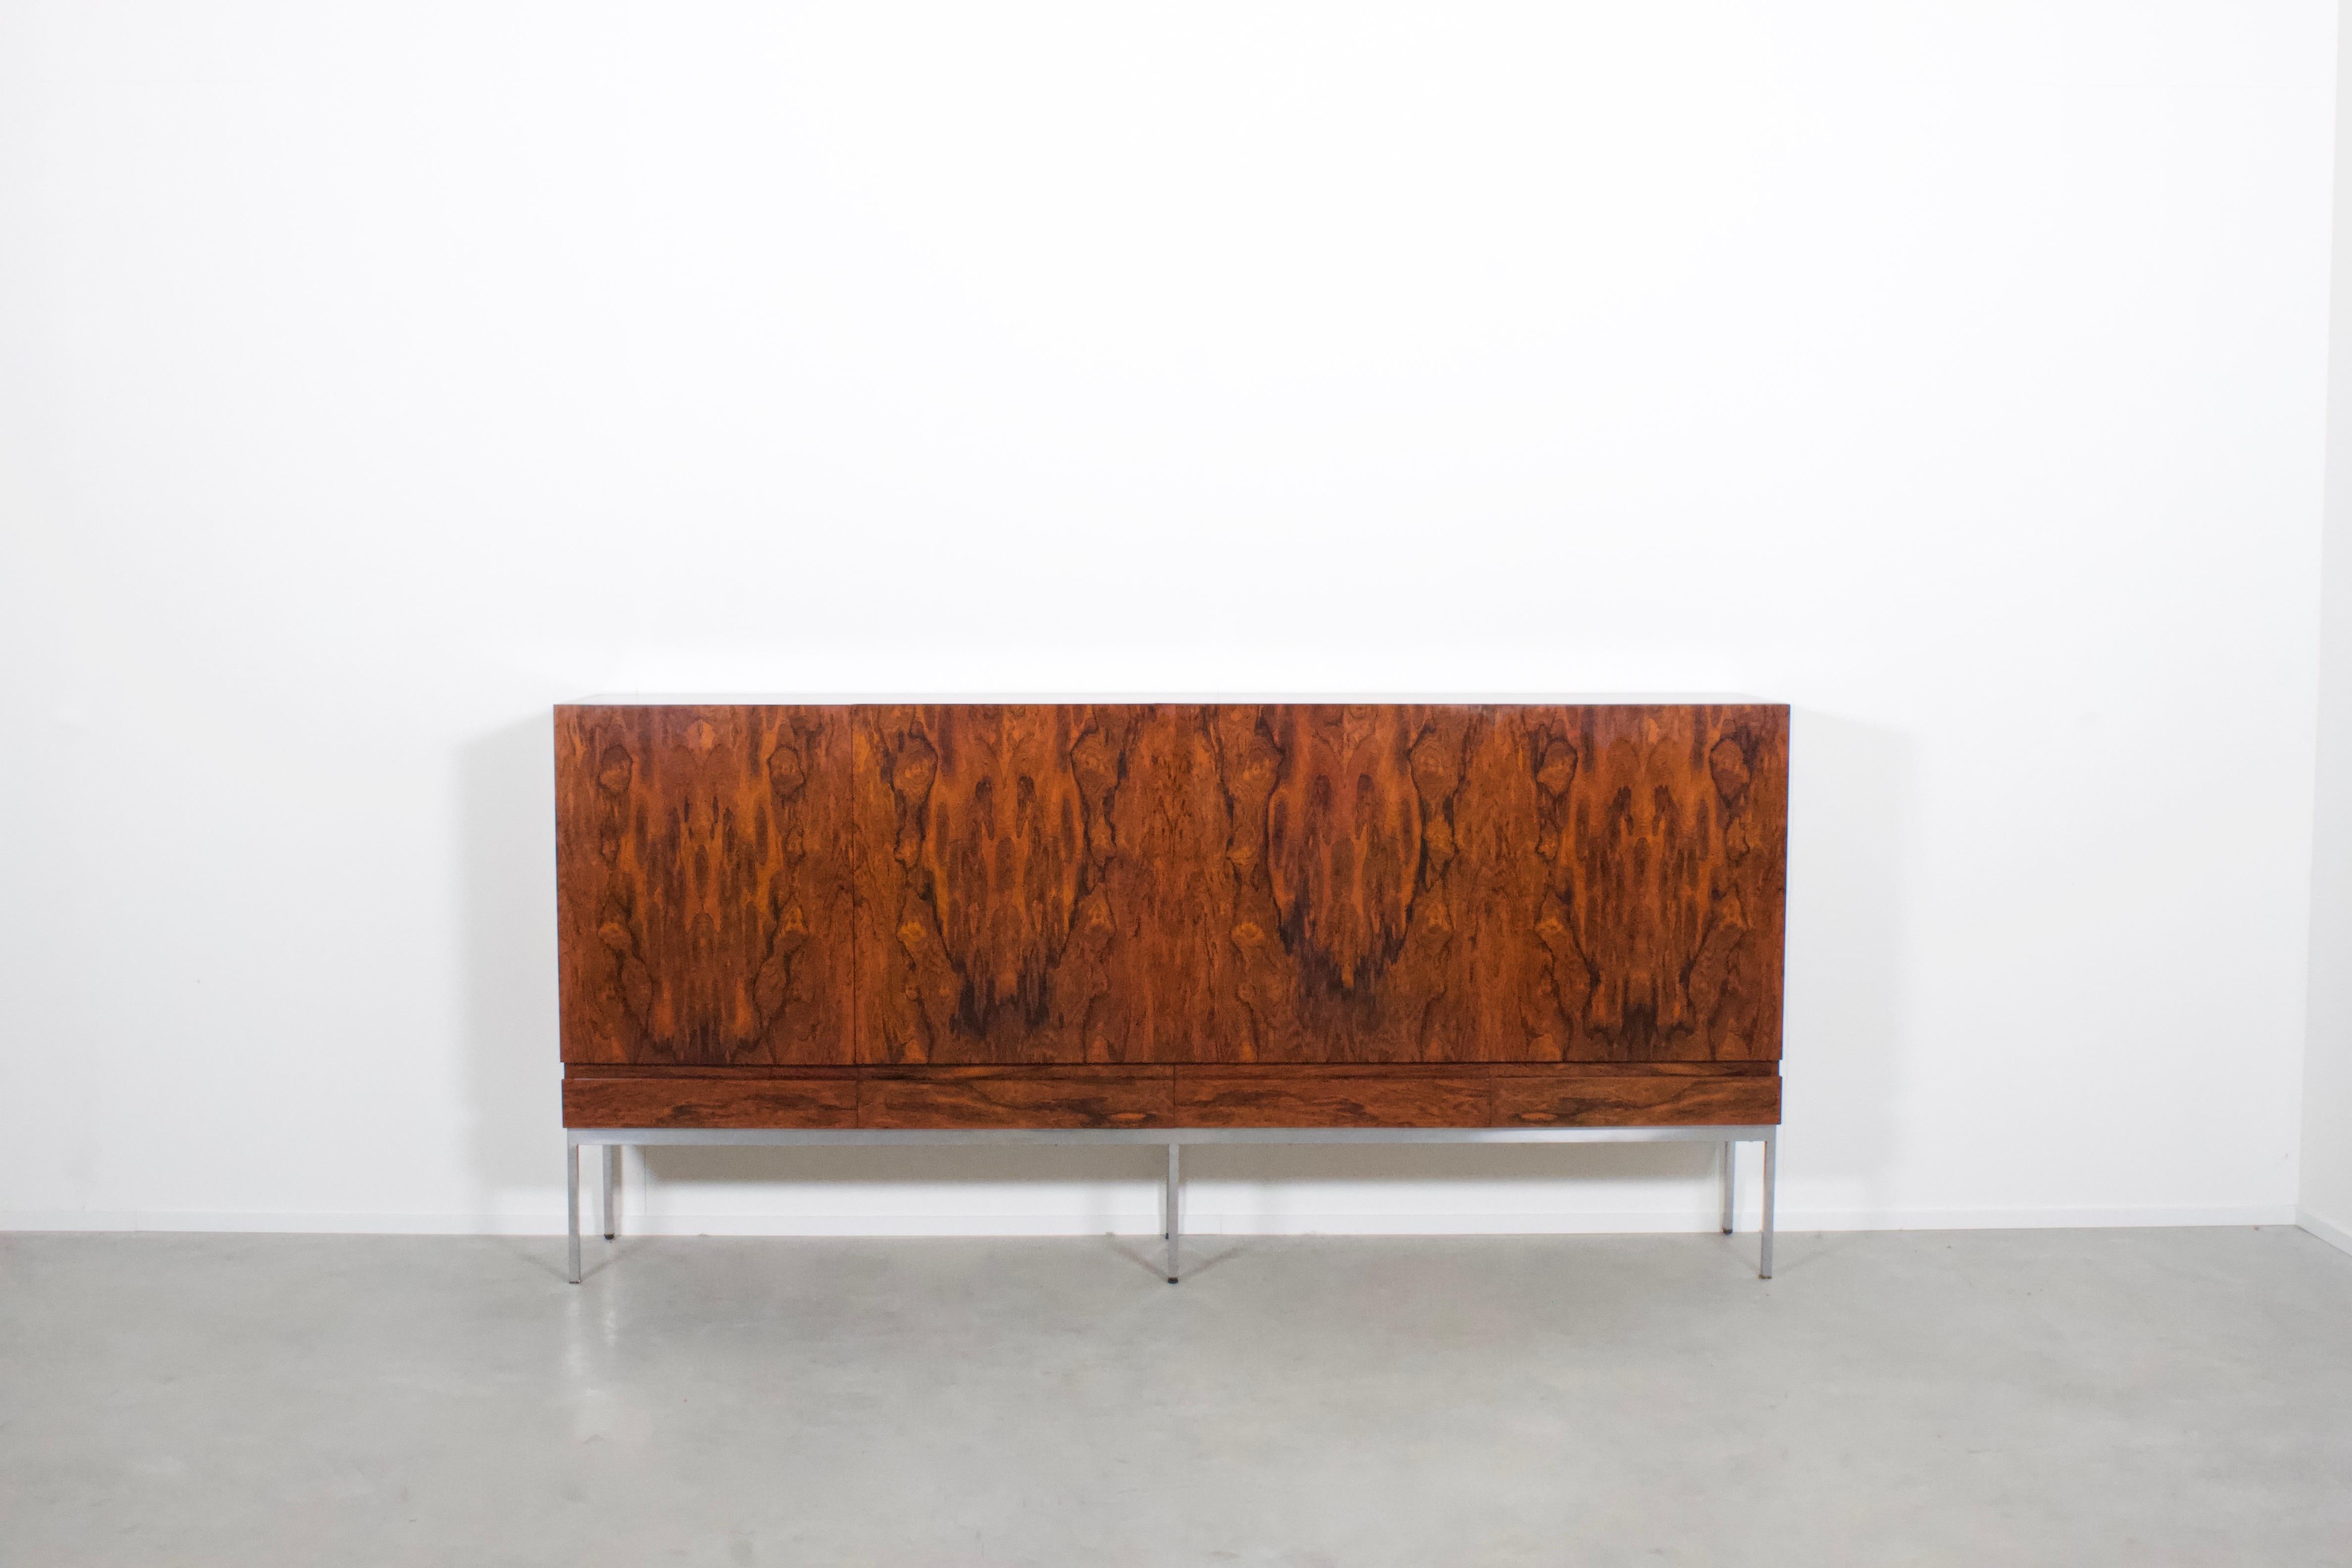 High quality Behr B60 sideboard / highboard in excellent condition.

Designed by Dieter Waeckerlin in the 1960s.

This rare version is made of a beautiful Rio Rosewood veneer which has a gorgeous grain and color.
It has an up to date EU CITES